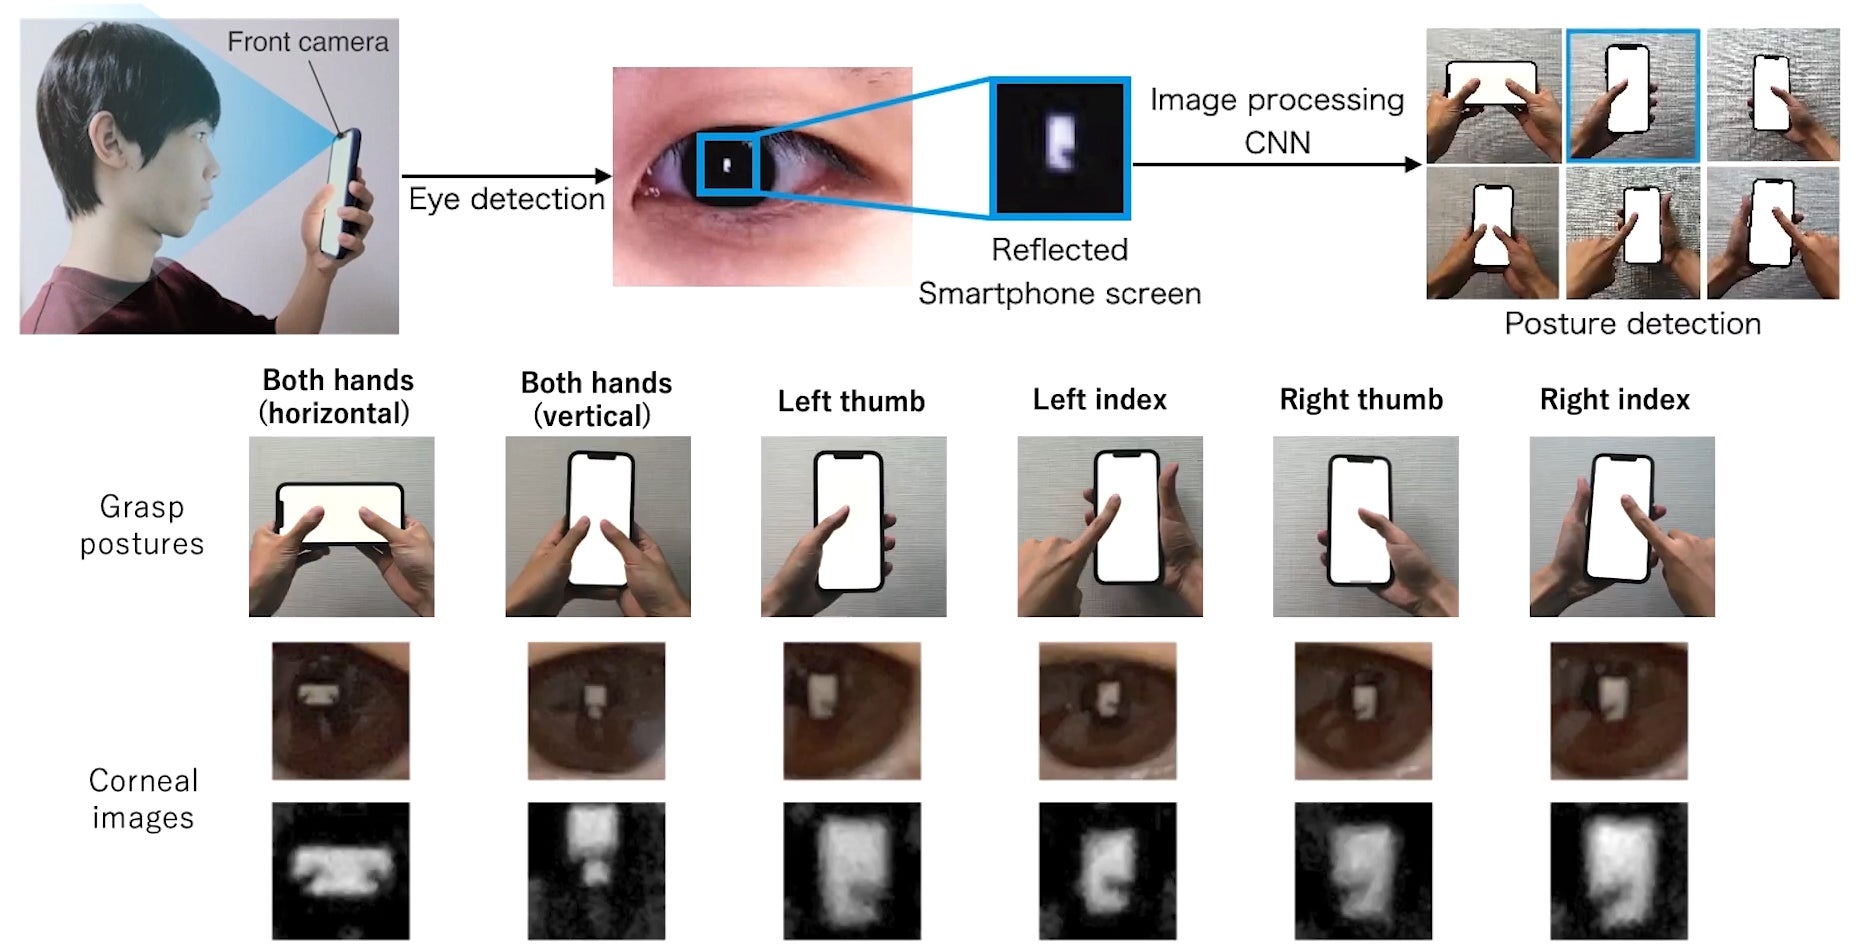 Your Smartphone’s Selfie Cam Can See a Lot by Capturing Reflections in Your Pupils